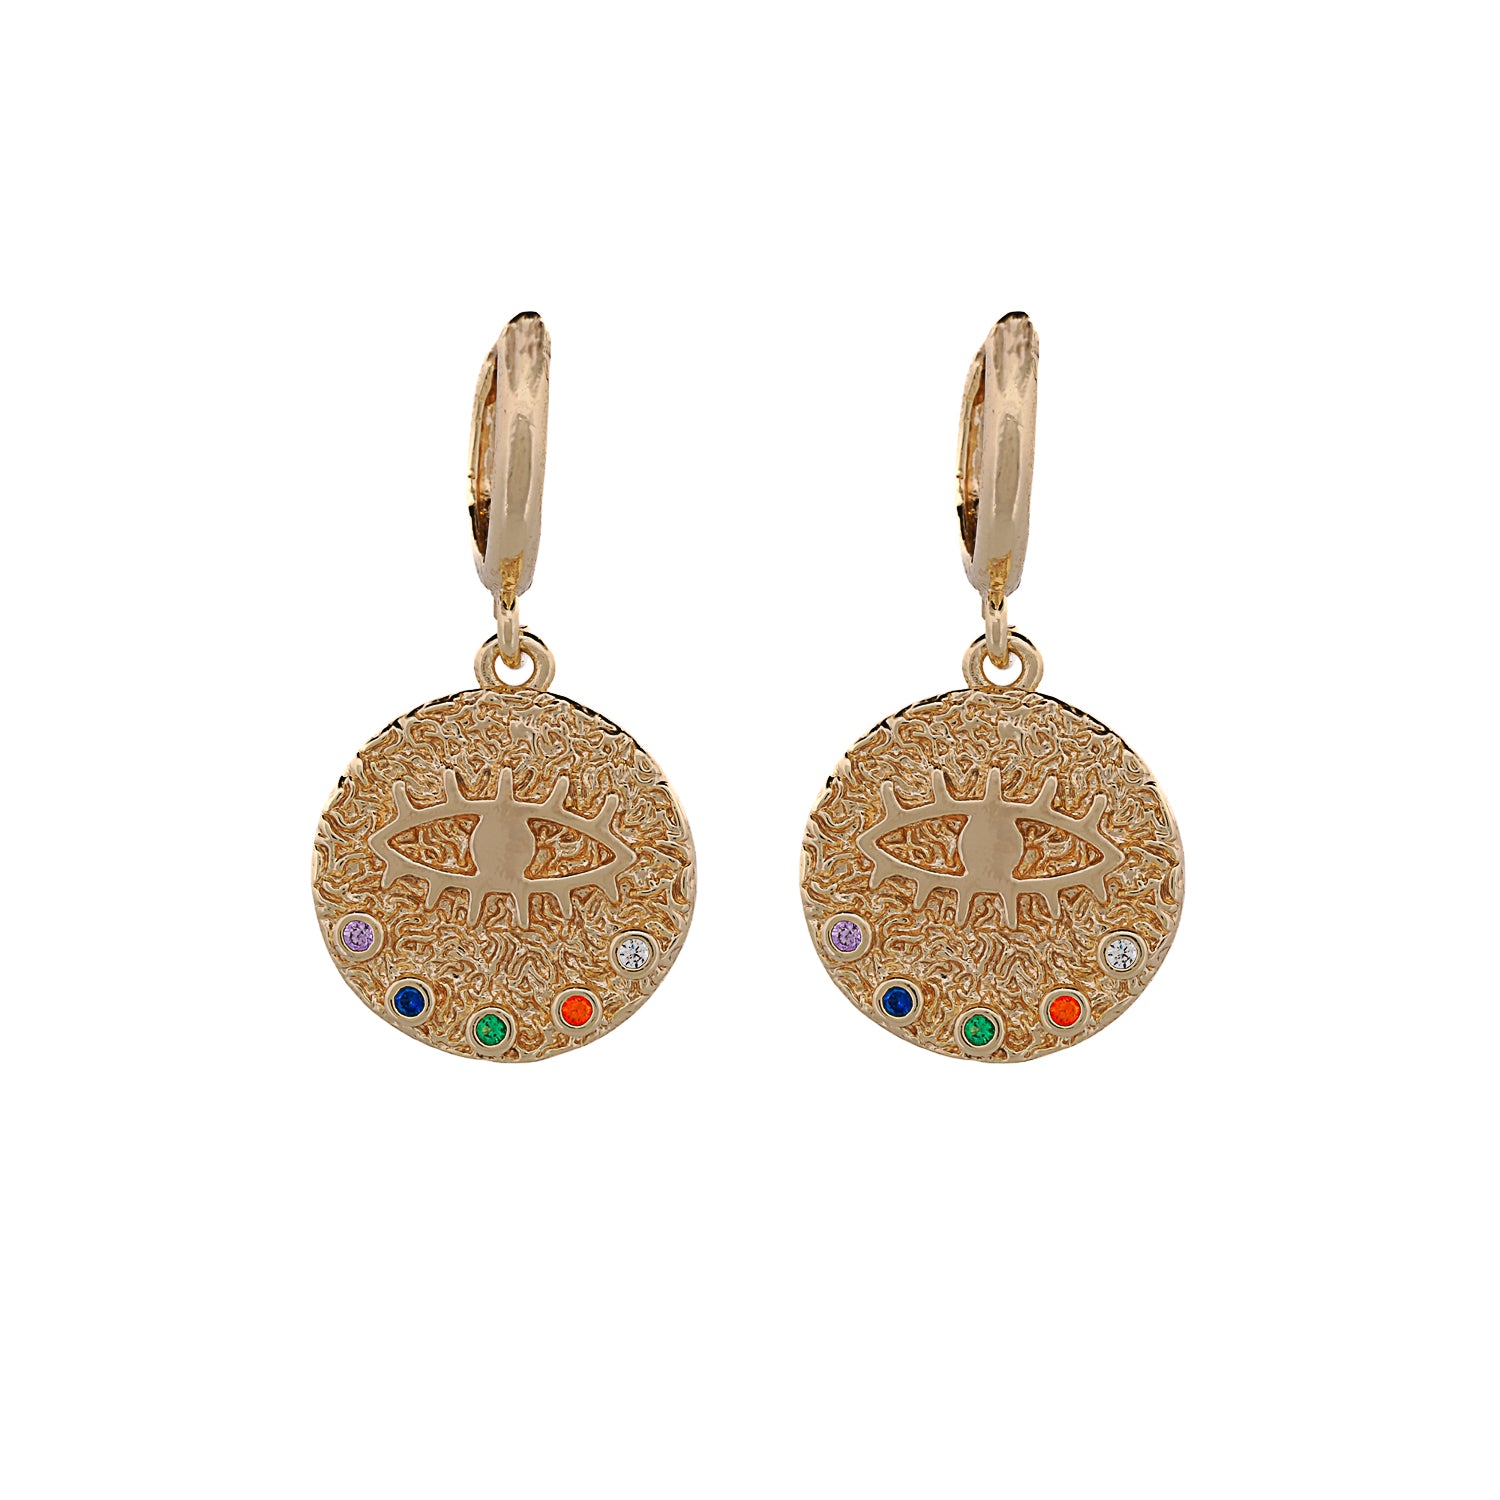 Evil Eye Gold Earrings with Multicolor Gemstones, a symbol of protection and timeless elegance.